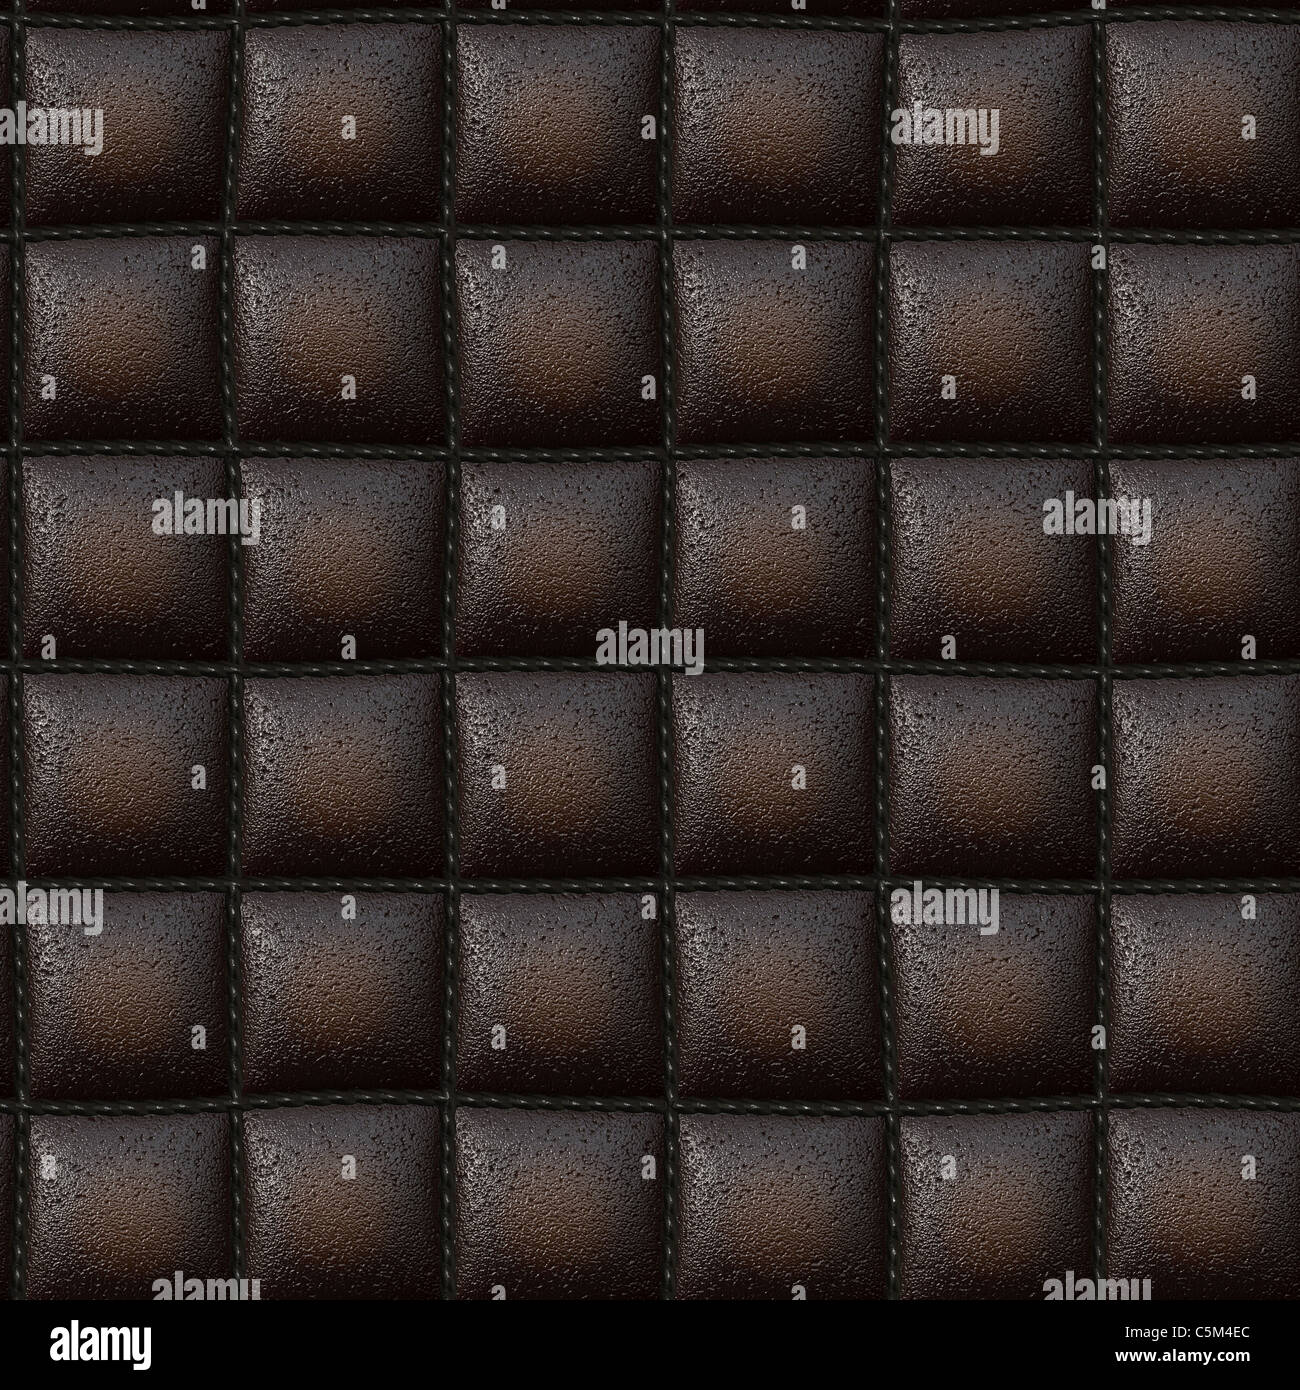 Dark brown leather padded leather or vinyl upholstery texture that tiles seamlessly as a pattern. Stock Photo